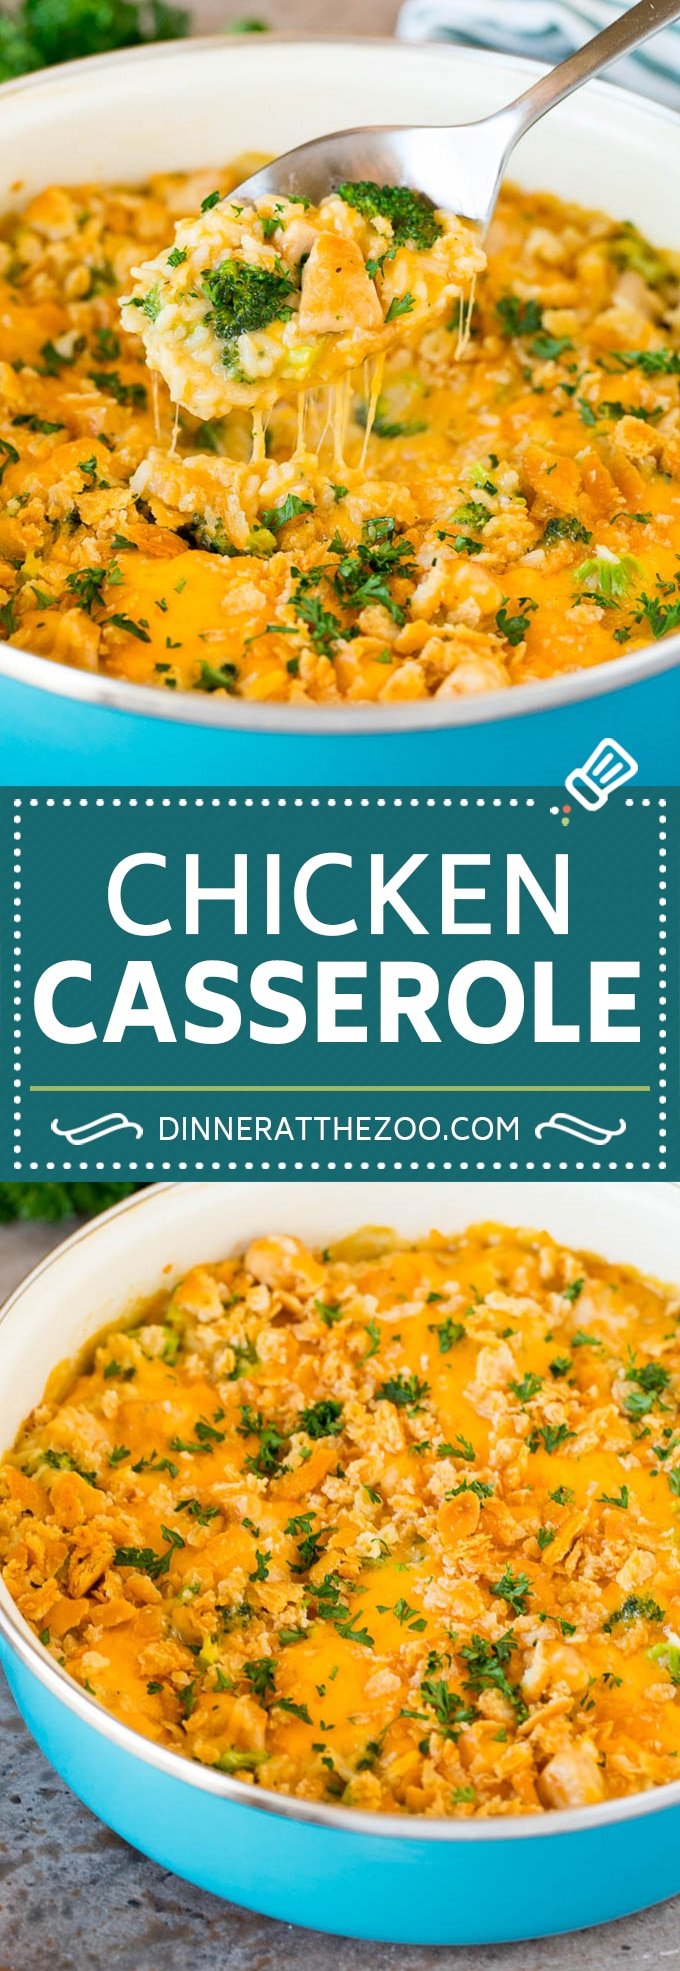 This chicken broccoli casserole is a one pot meal with sauteed chicken, rice, broccoli florets and cheese, finished off with a crunchy topping.